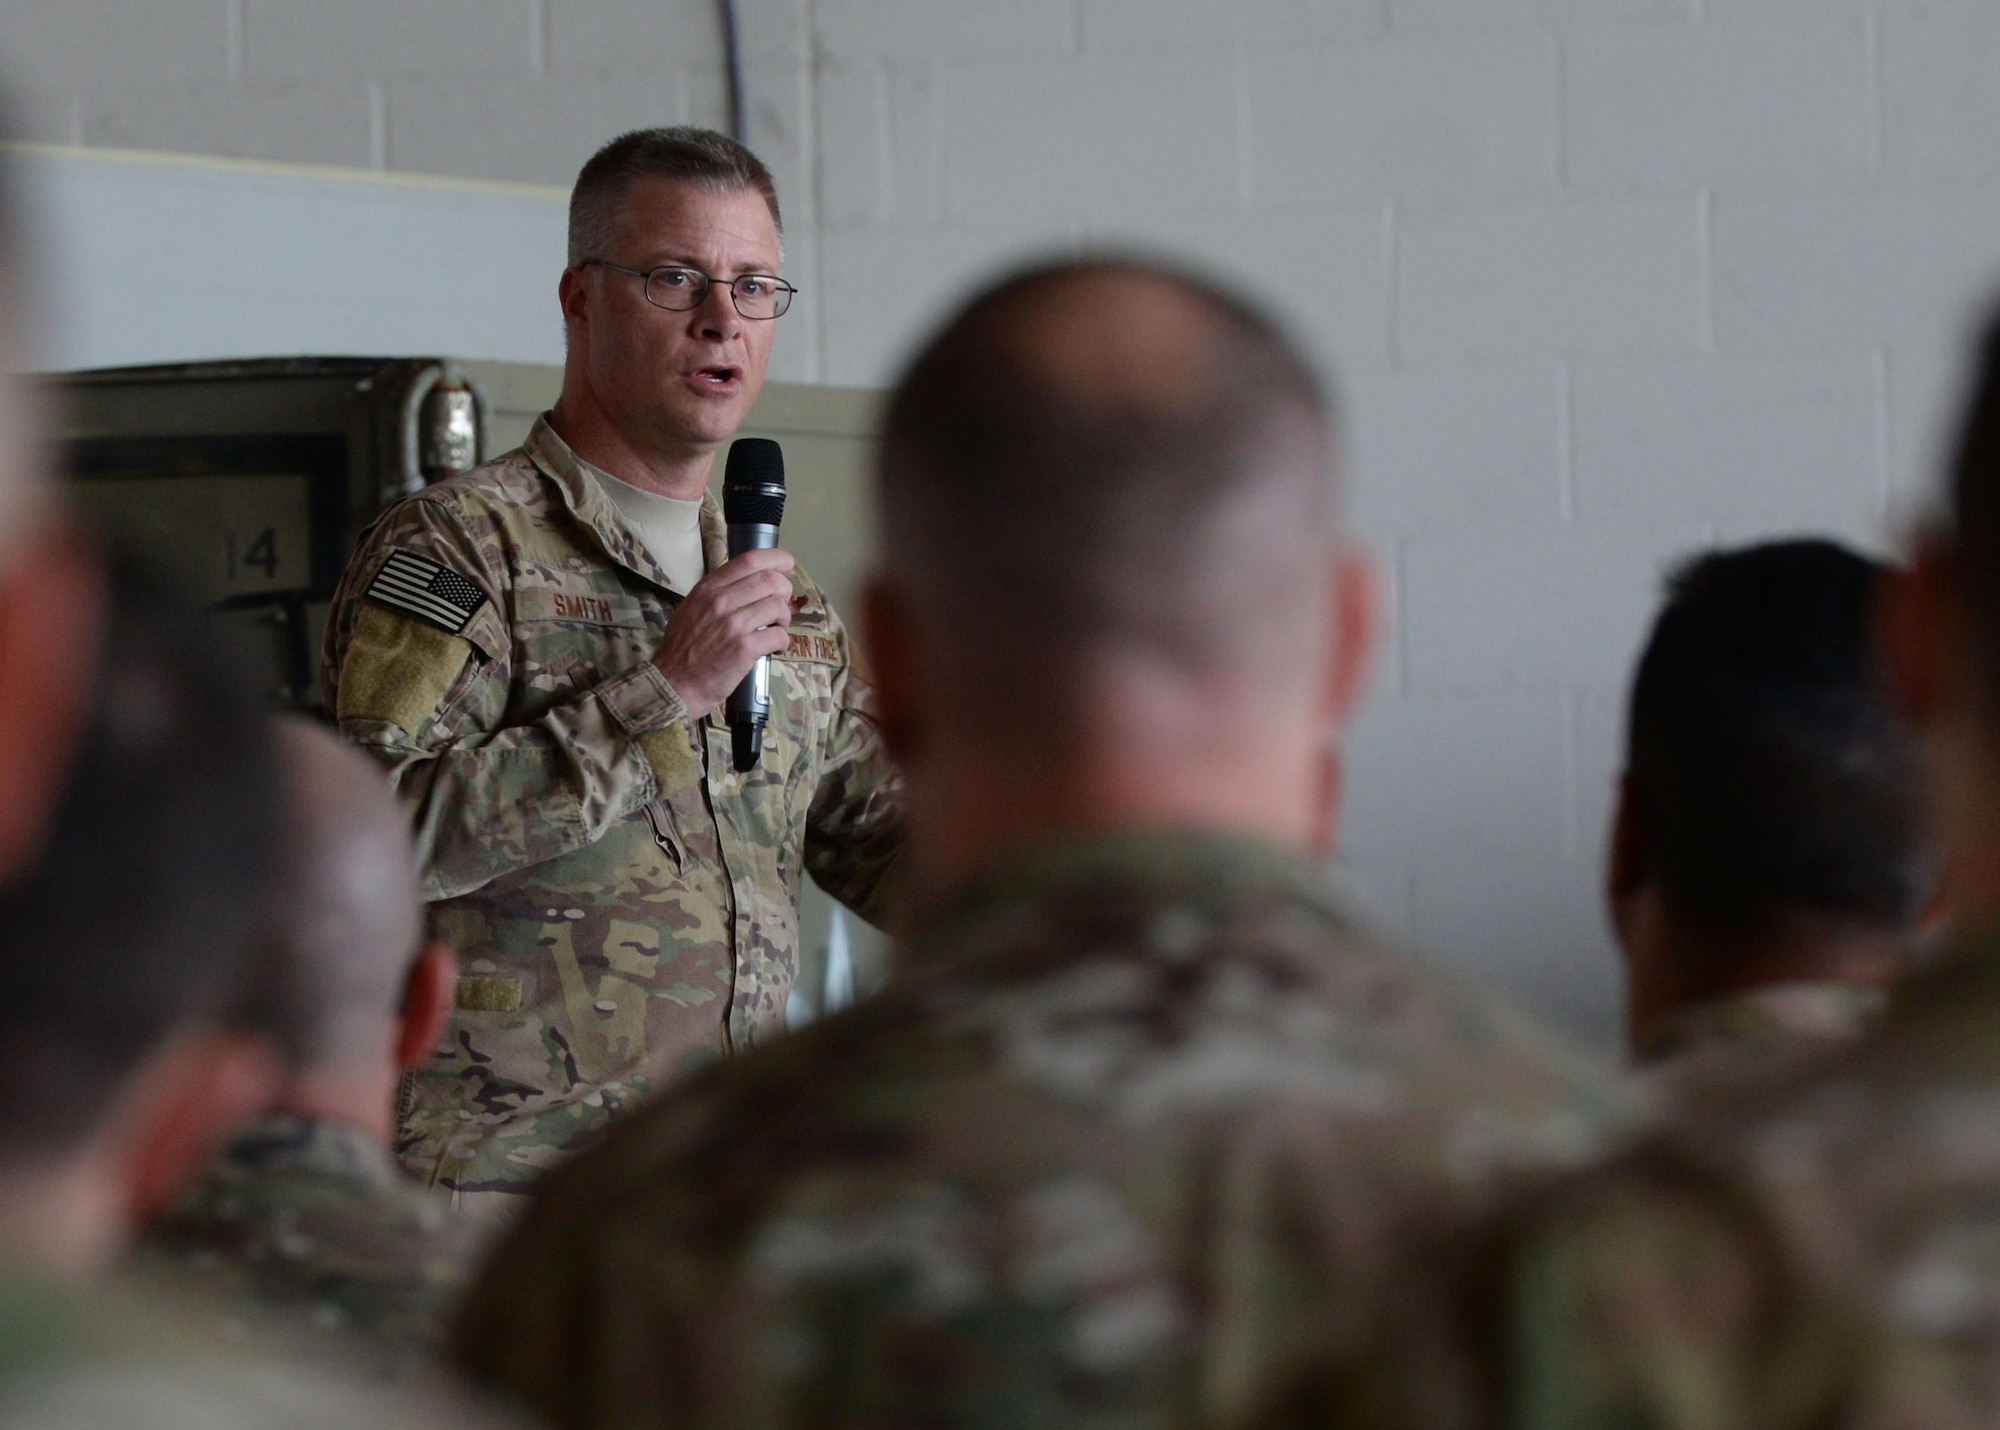 U.S. Air Force Chief Master Sgt. Gregory Smith, Command Chief Master Sergeant of Air Force Special Operations Command, speaks to Airmen assigned to the 352nd Special Operations Wing, May 24, 2017 during an all-call on RAF Mildenhall, England. Following the all-call, Smith visited various units within the wing to meet the Airmen and talk about their mission. (U.S. Air Force photo by Senior Airman Justine Rho)